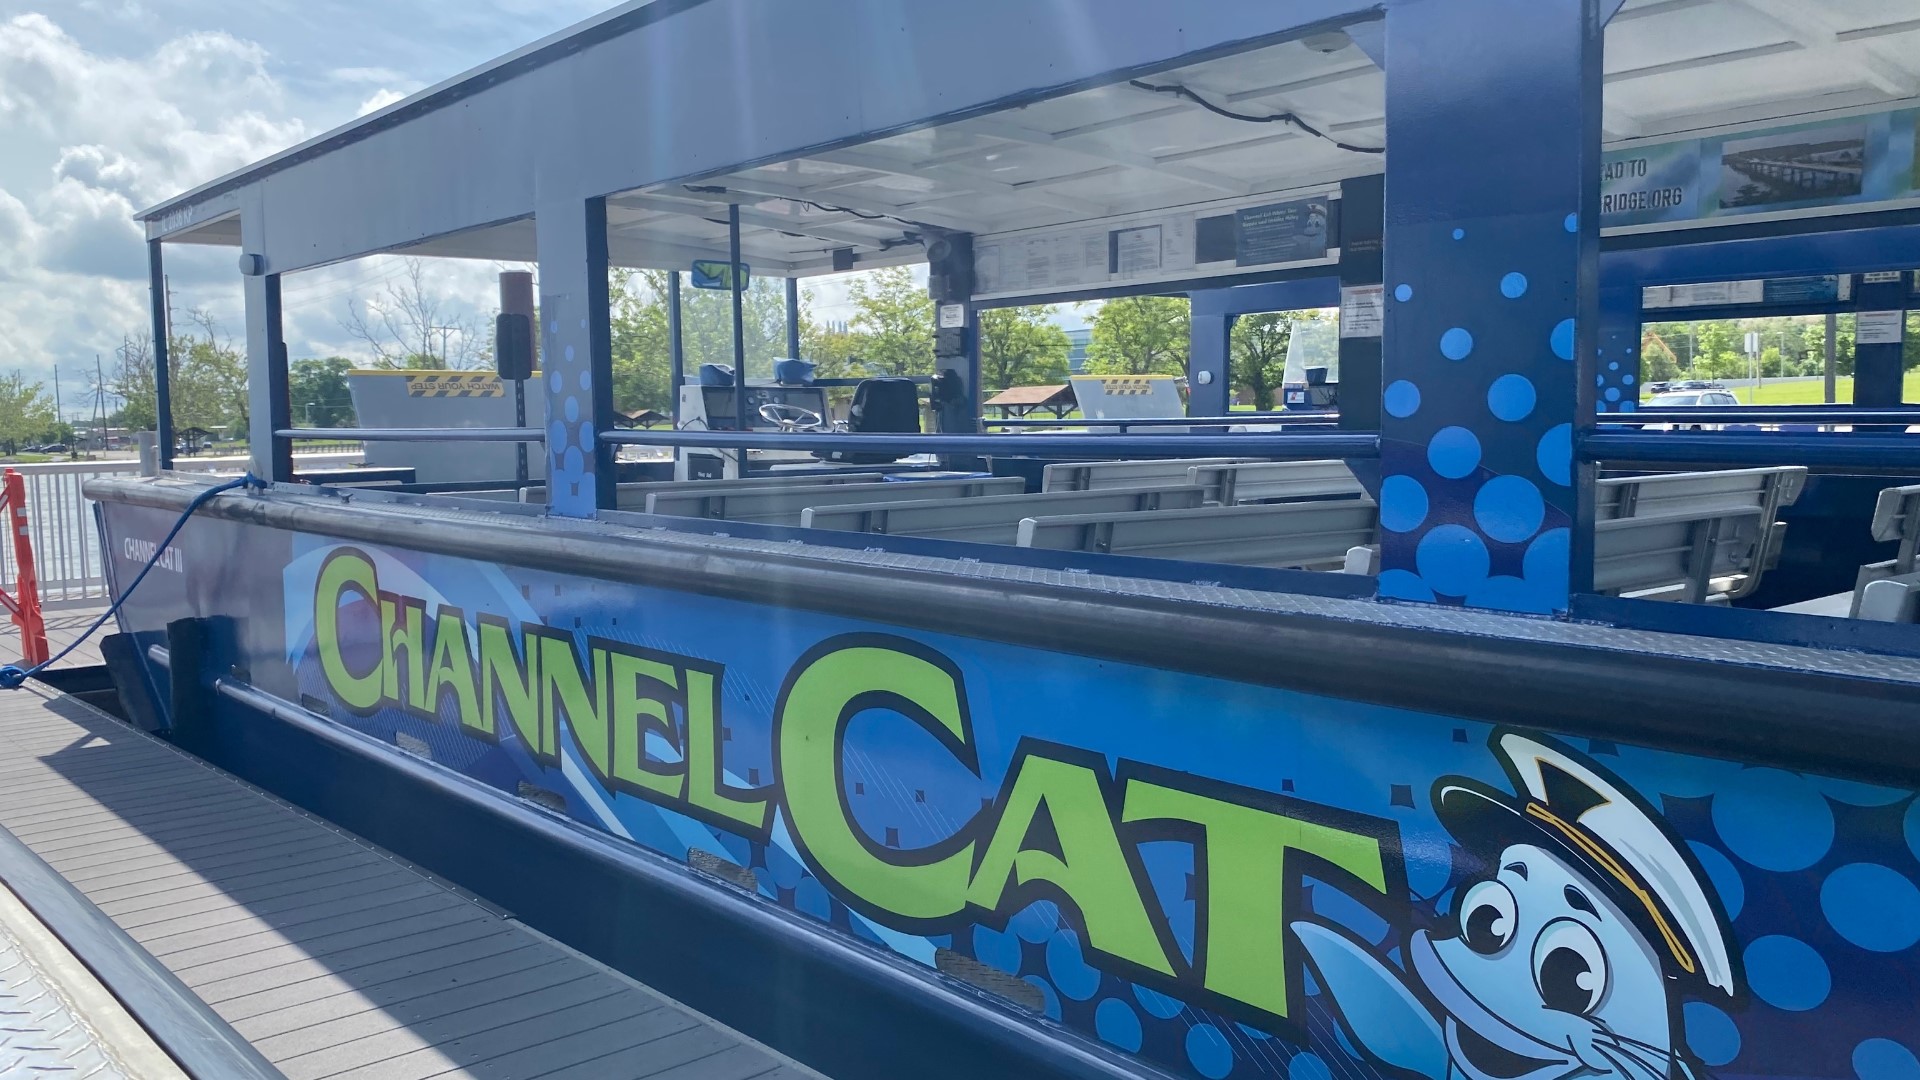 The Supreme Court issued a ruling on Trump's immunity case, and the Channel Cat has halted operations due to river flooding.